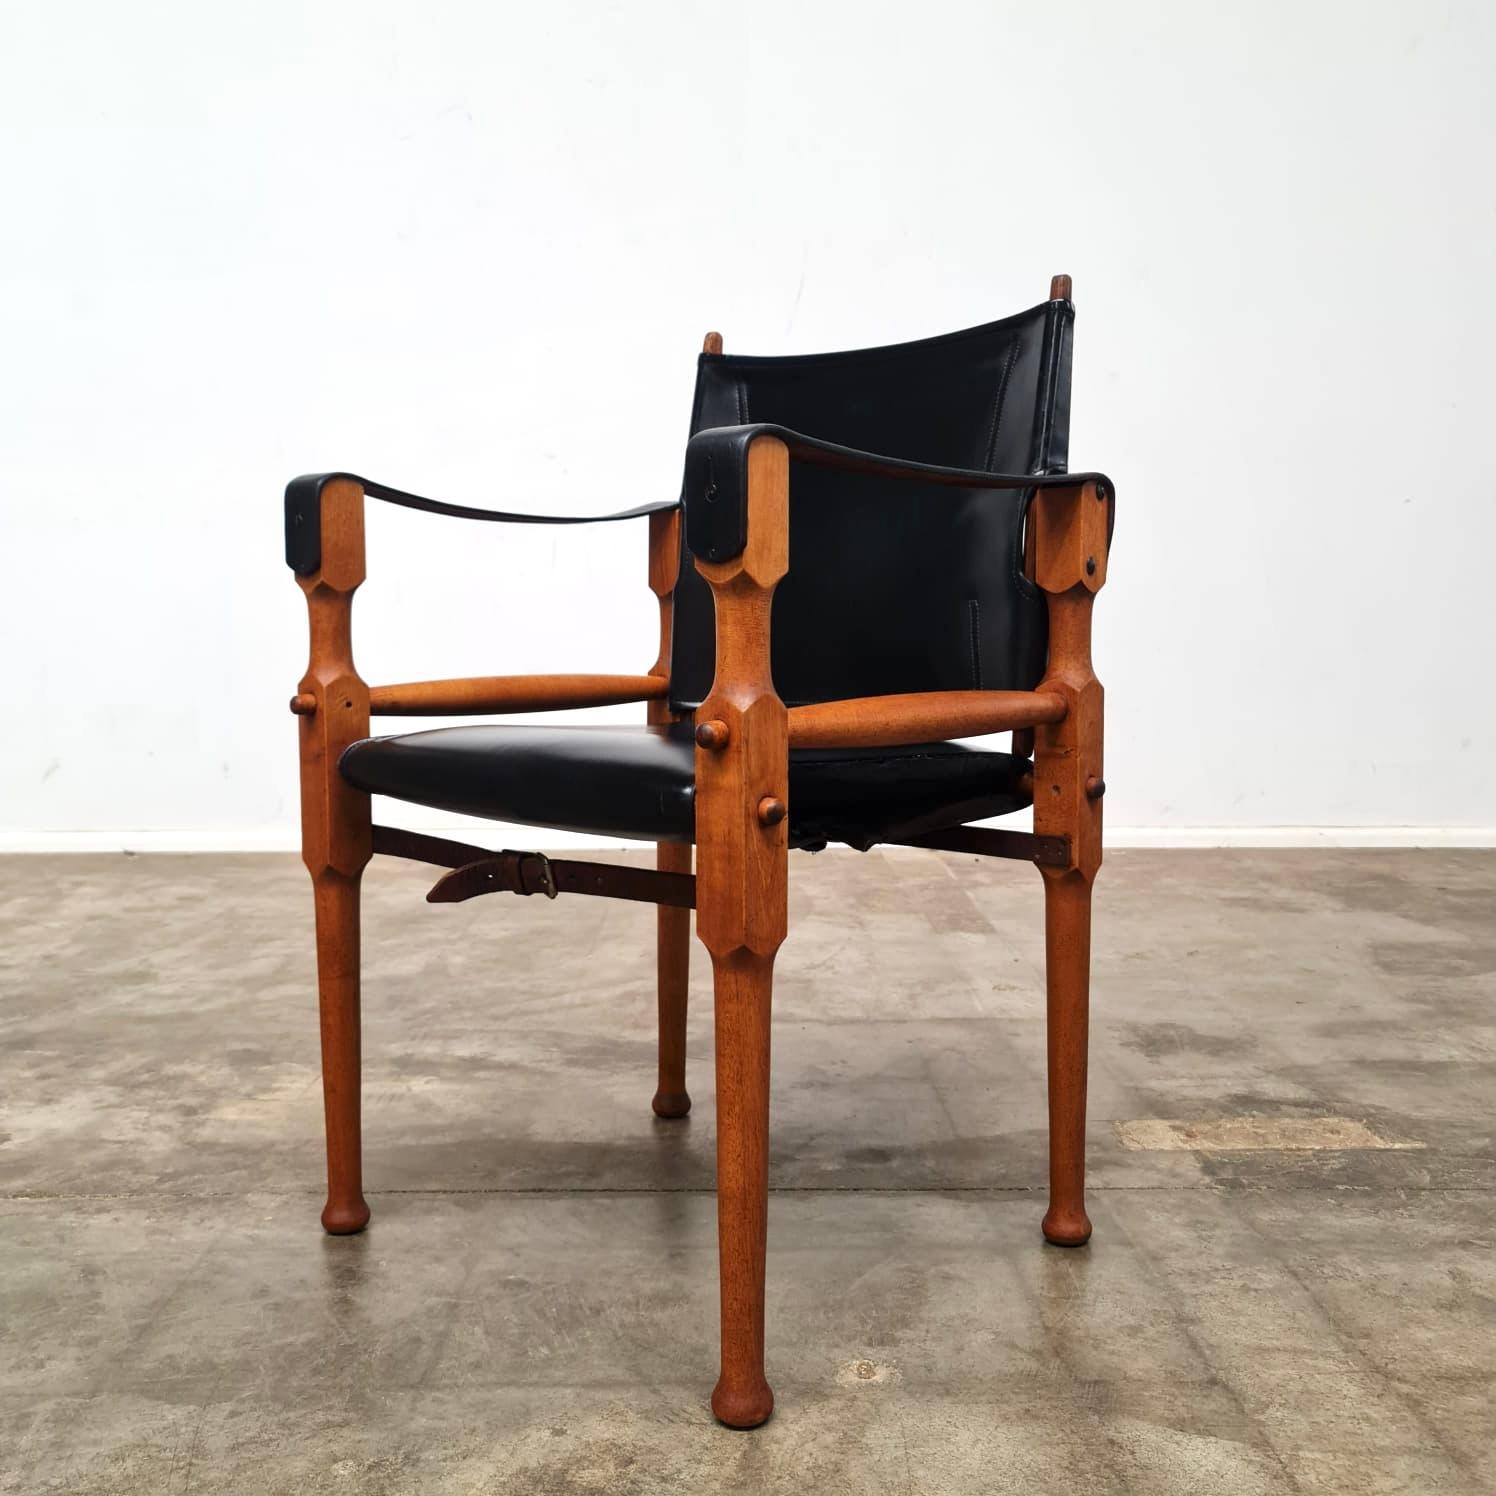 A pair of 1960s Safari chairs designed by Australian Michael Hirst. Based on the Indian Roorkhee Chairs used by British military officers.

Frames have been stripped and polished, The leather straps and foux leather base have all been cleaned and